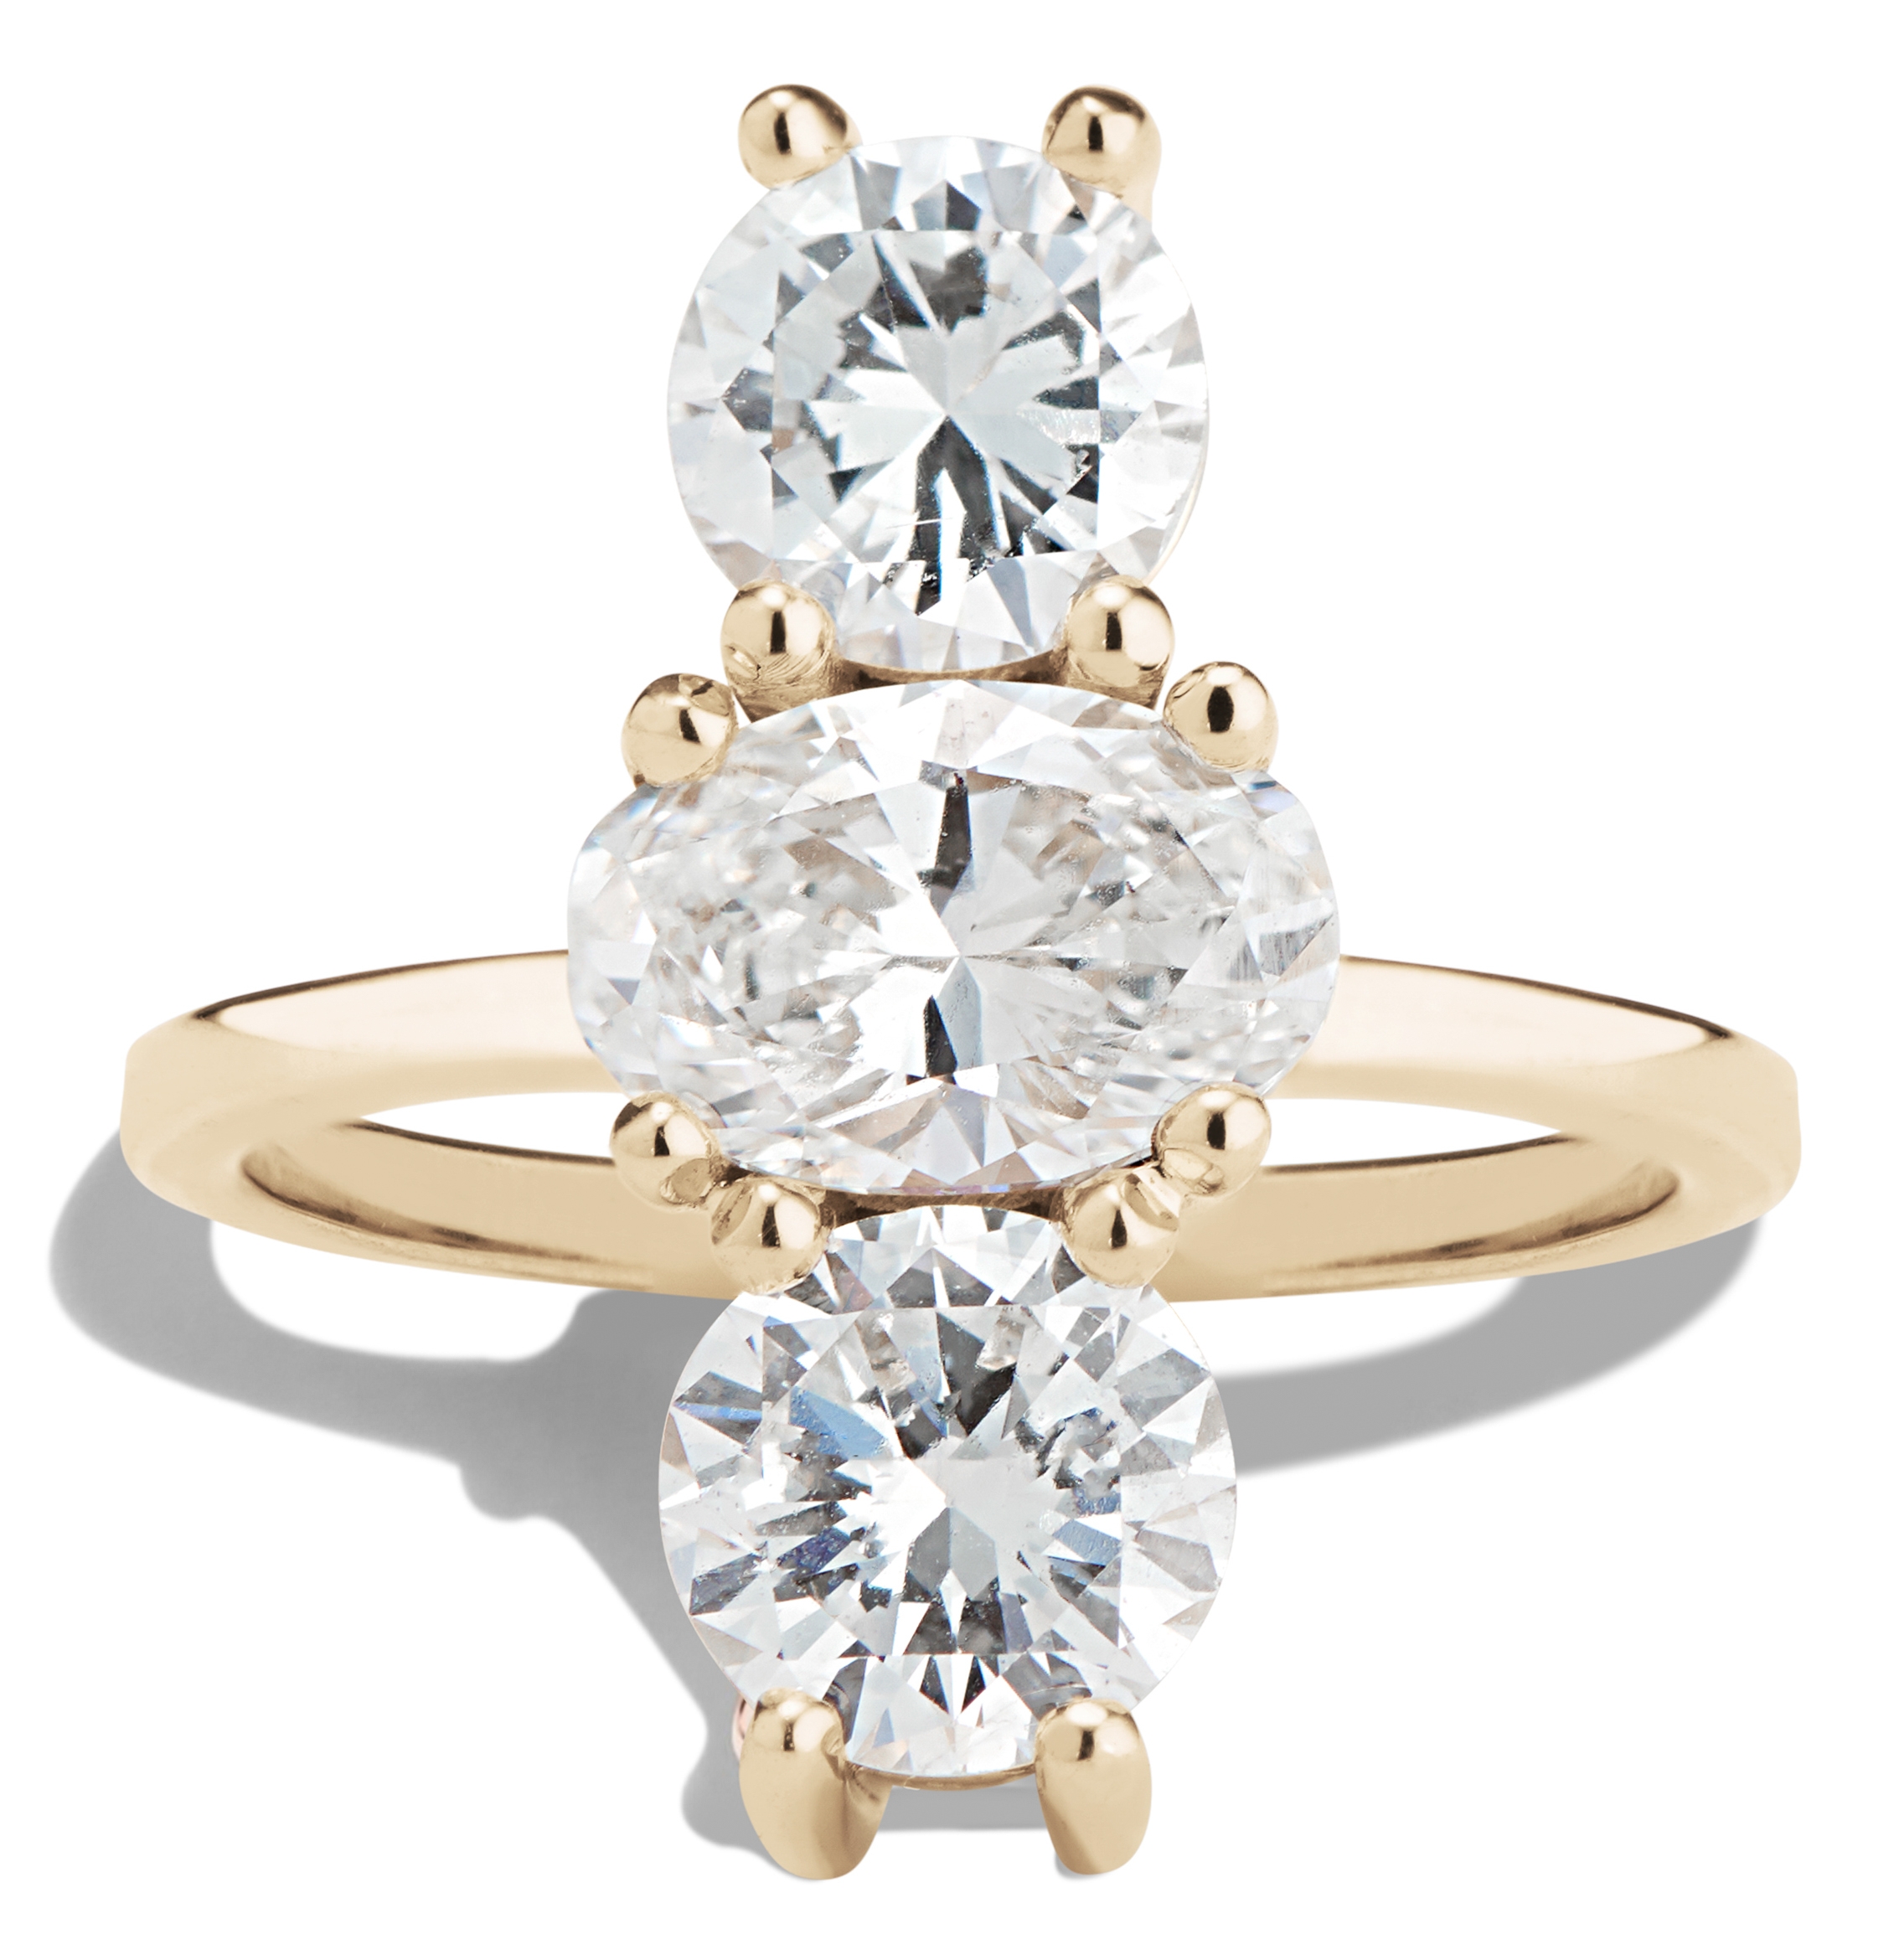 Details about   14K White Gold Over 2.25Ct Lab Created Diamond 3-Stone Engagement Wedding Ring 